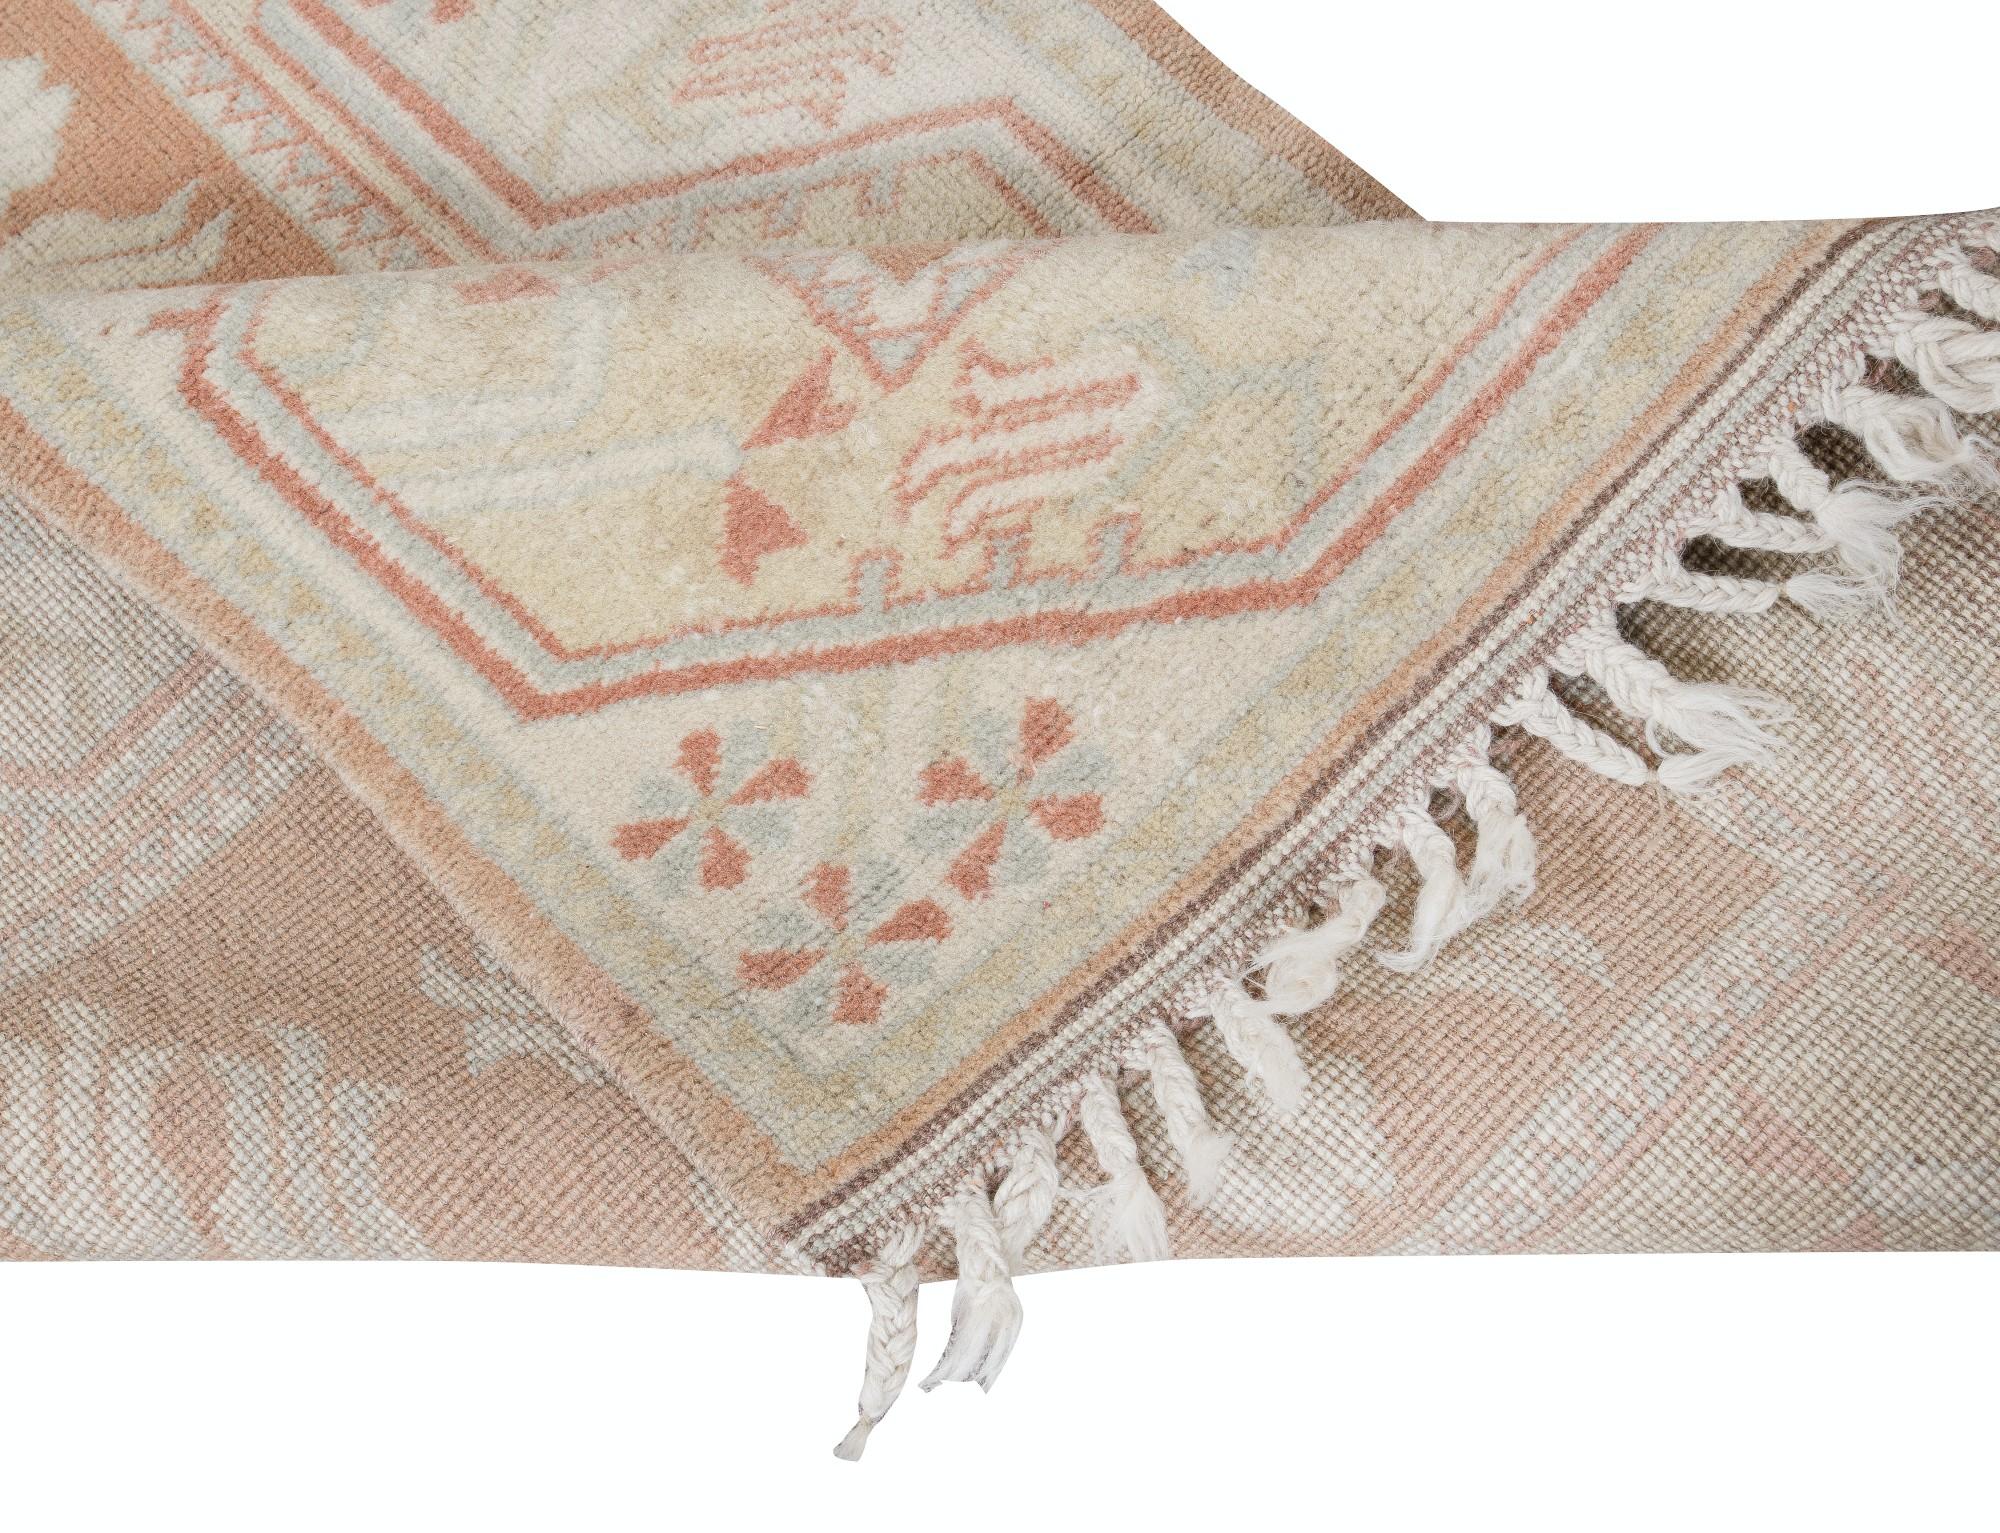 Oushak 2.7x4.3 Ft Vintage Handmade Anatolian Milas Small Rug in Beige & Soft Red Colors For Sale